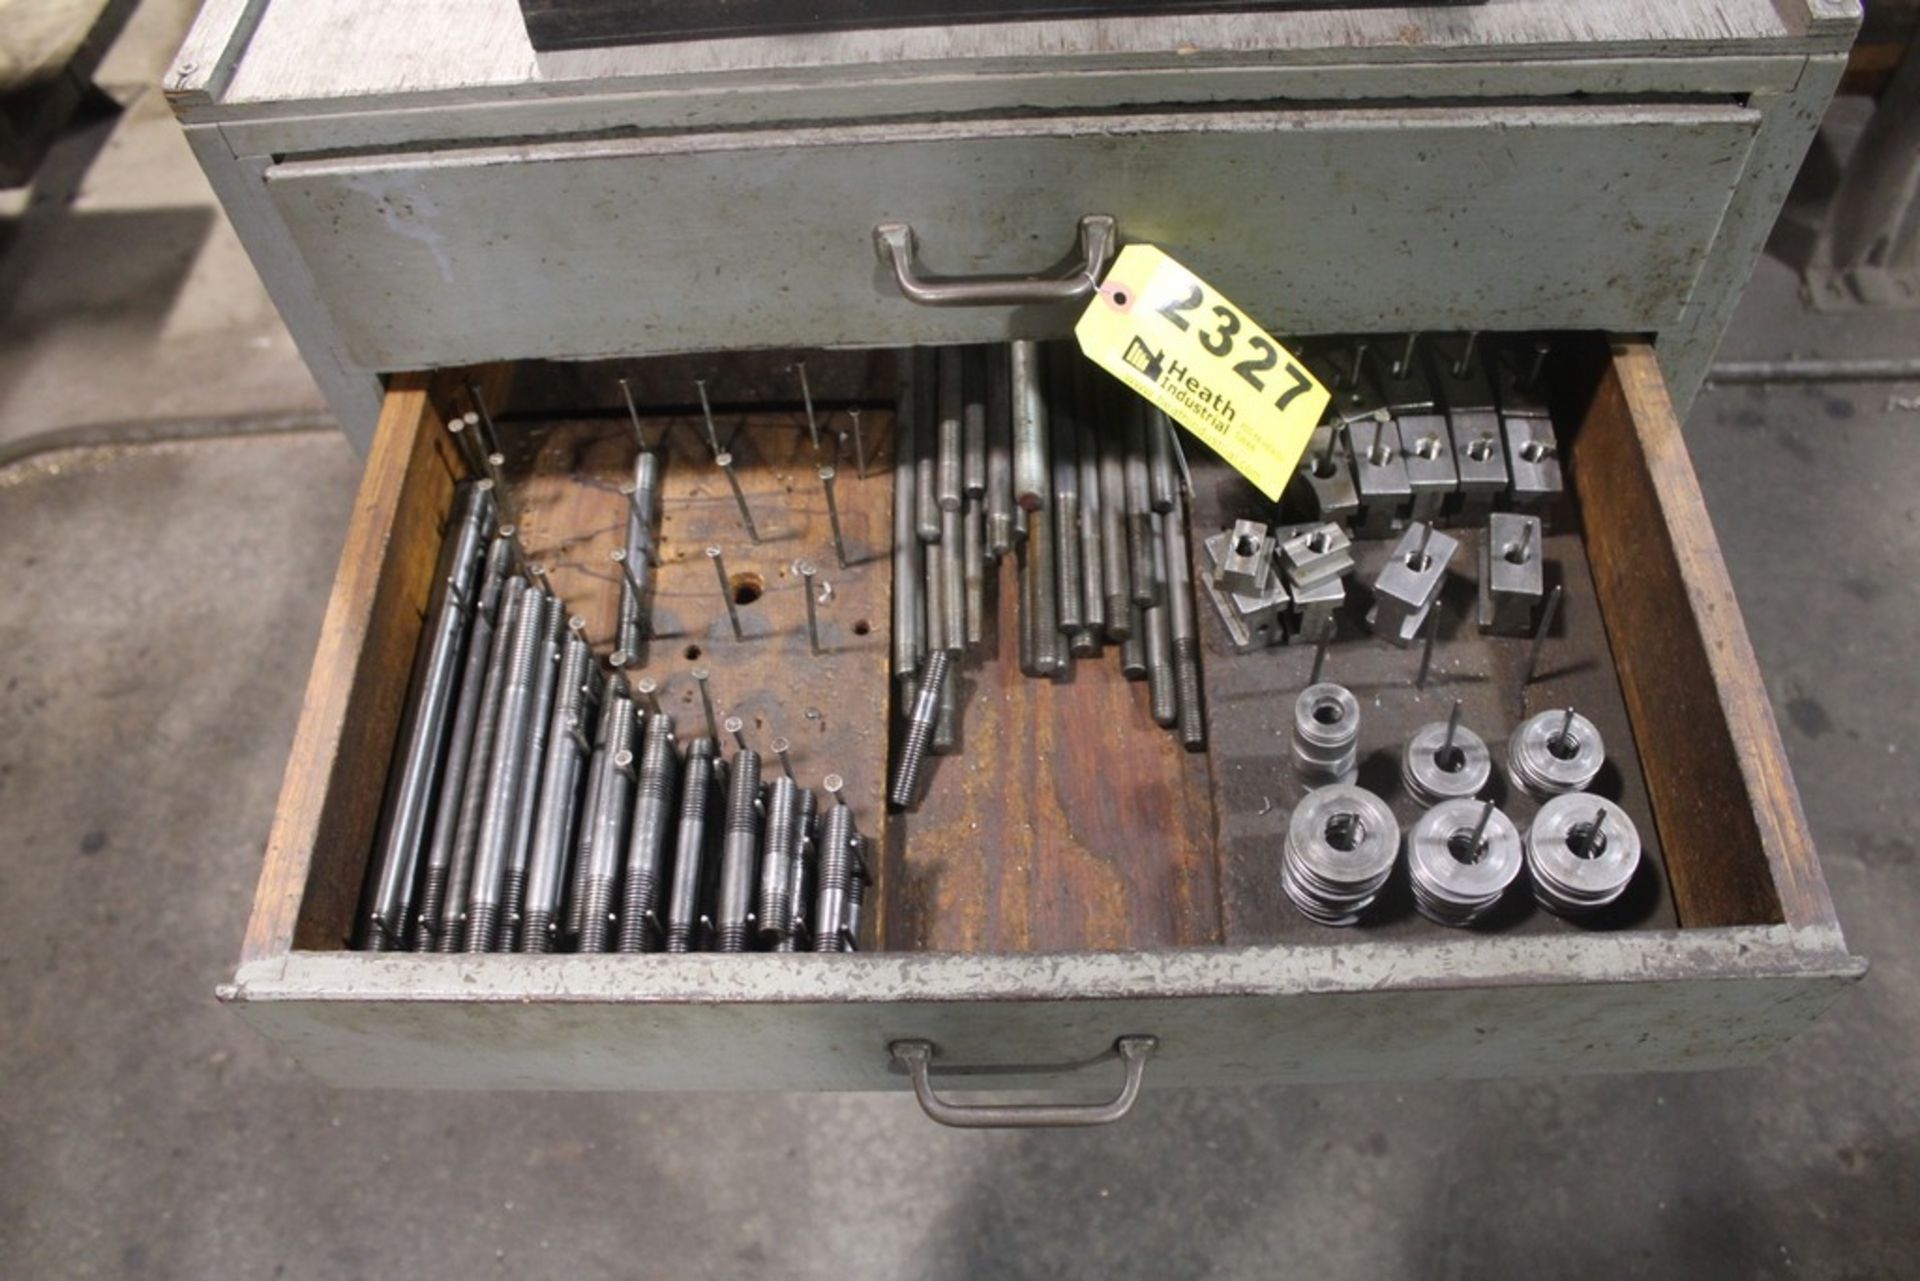 PRATT & WHITNEY TOOL CABINET WITH COLLETS, WRENCHES, HOLD DOWNS - Image 3 of 3